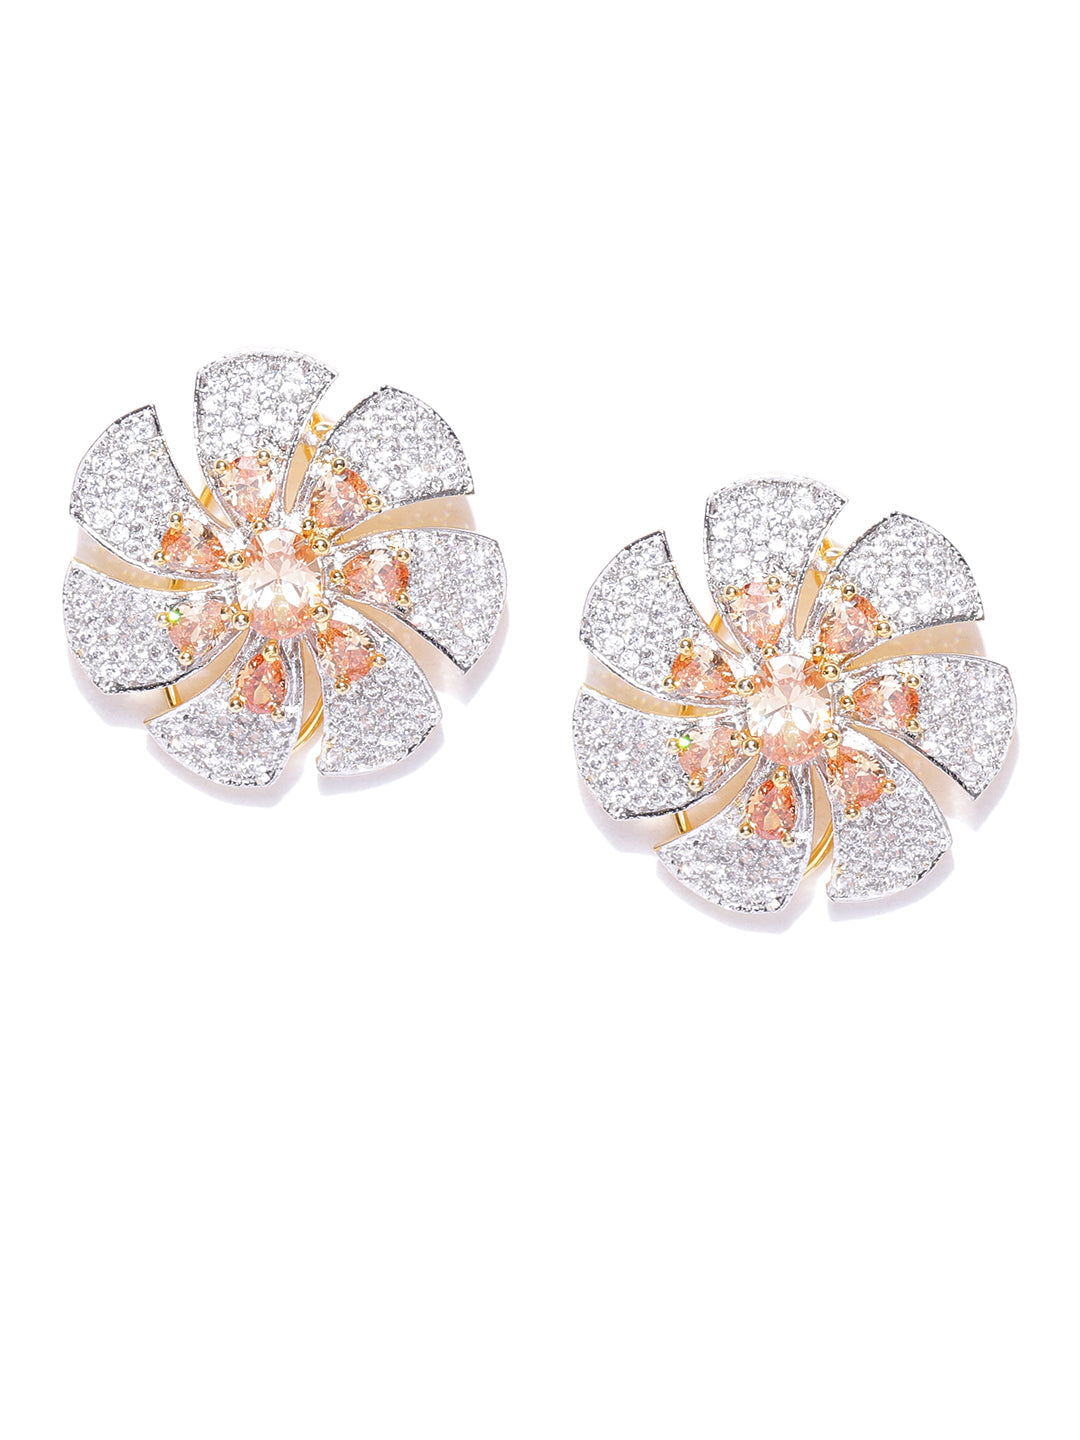 Sparkling Floral Shaped Two Tone American Diamond Stud Earring For Women And Girls - NOZ2TOZ